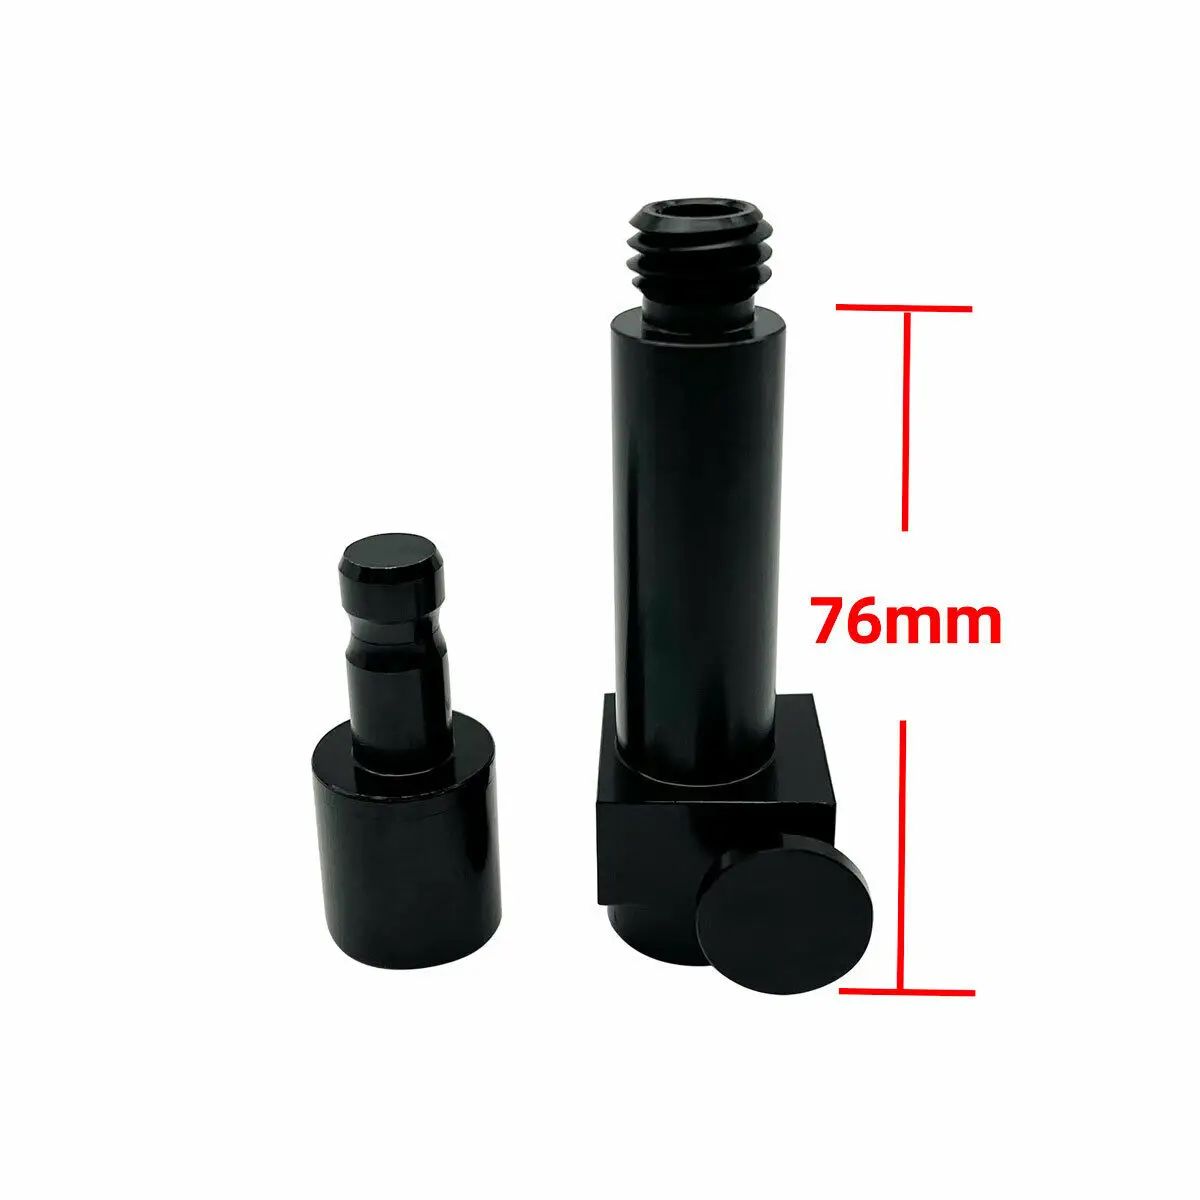 

For Prisms Pole Adapter Kit 5/8x11 Thread Accessories GPS Antenna GPS Measurement Lightweight Replacement Brand New